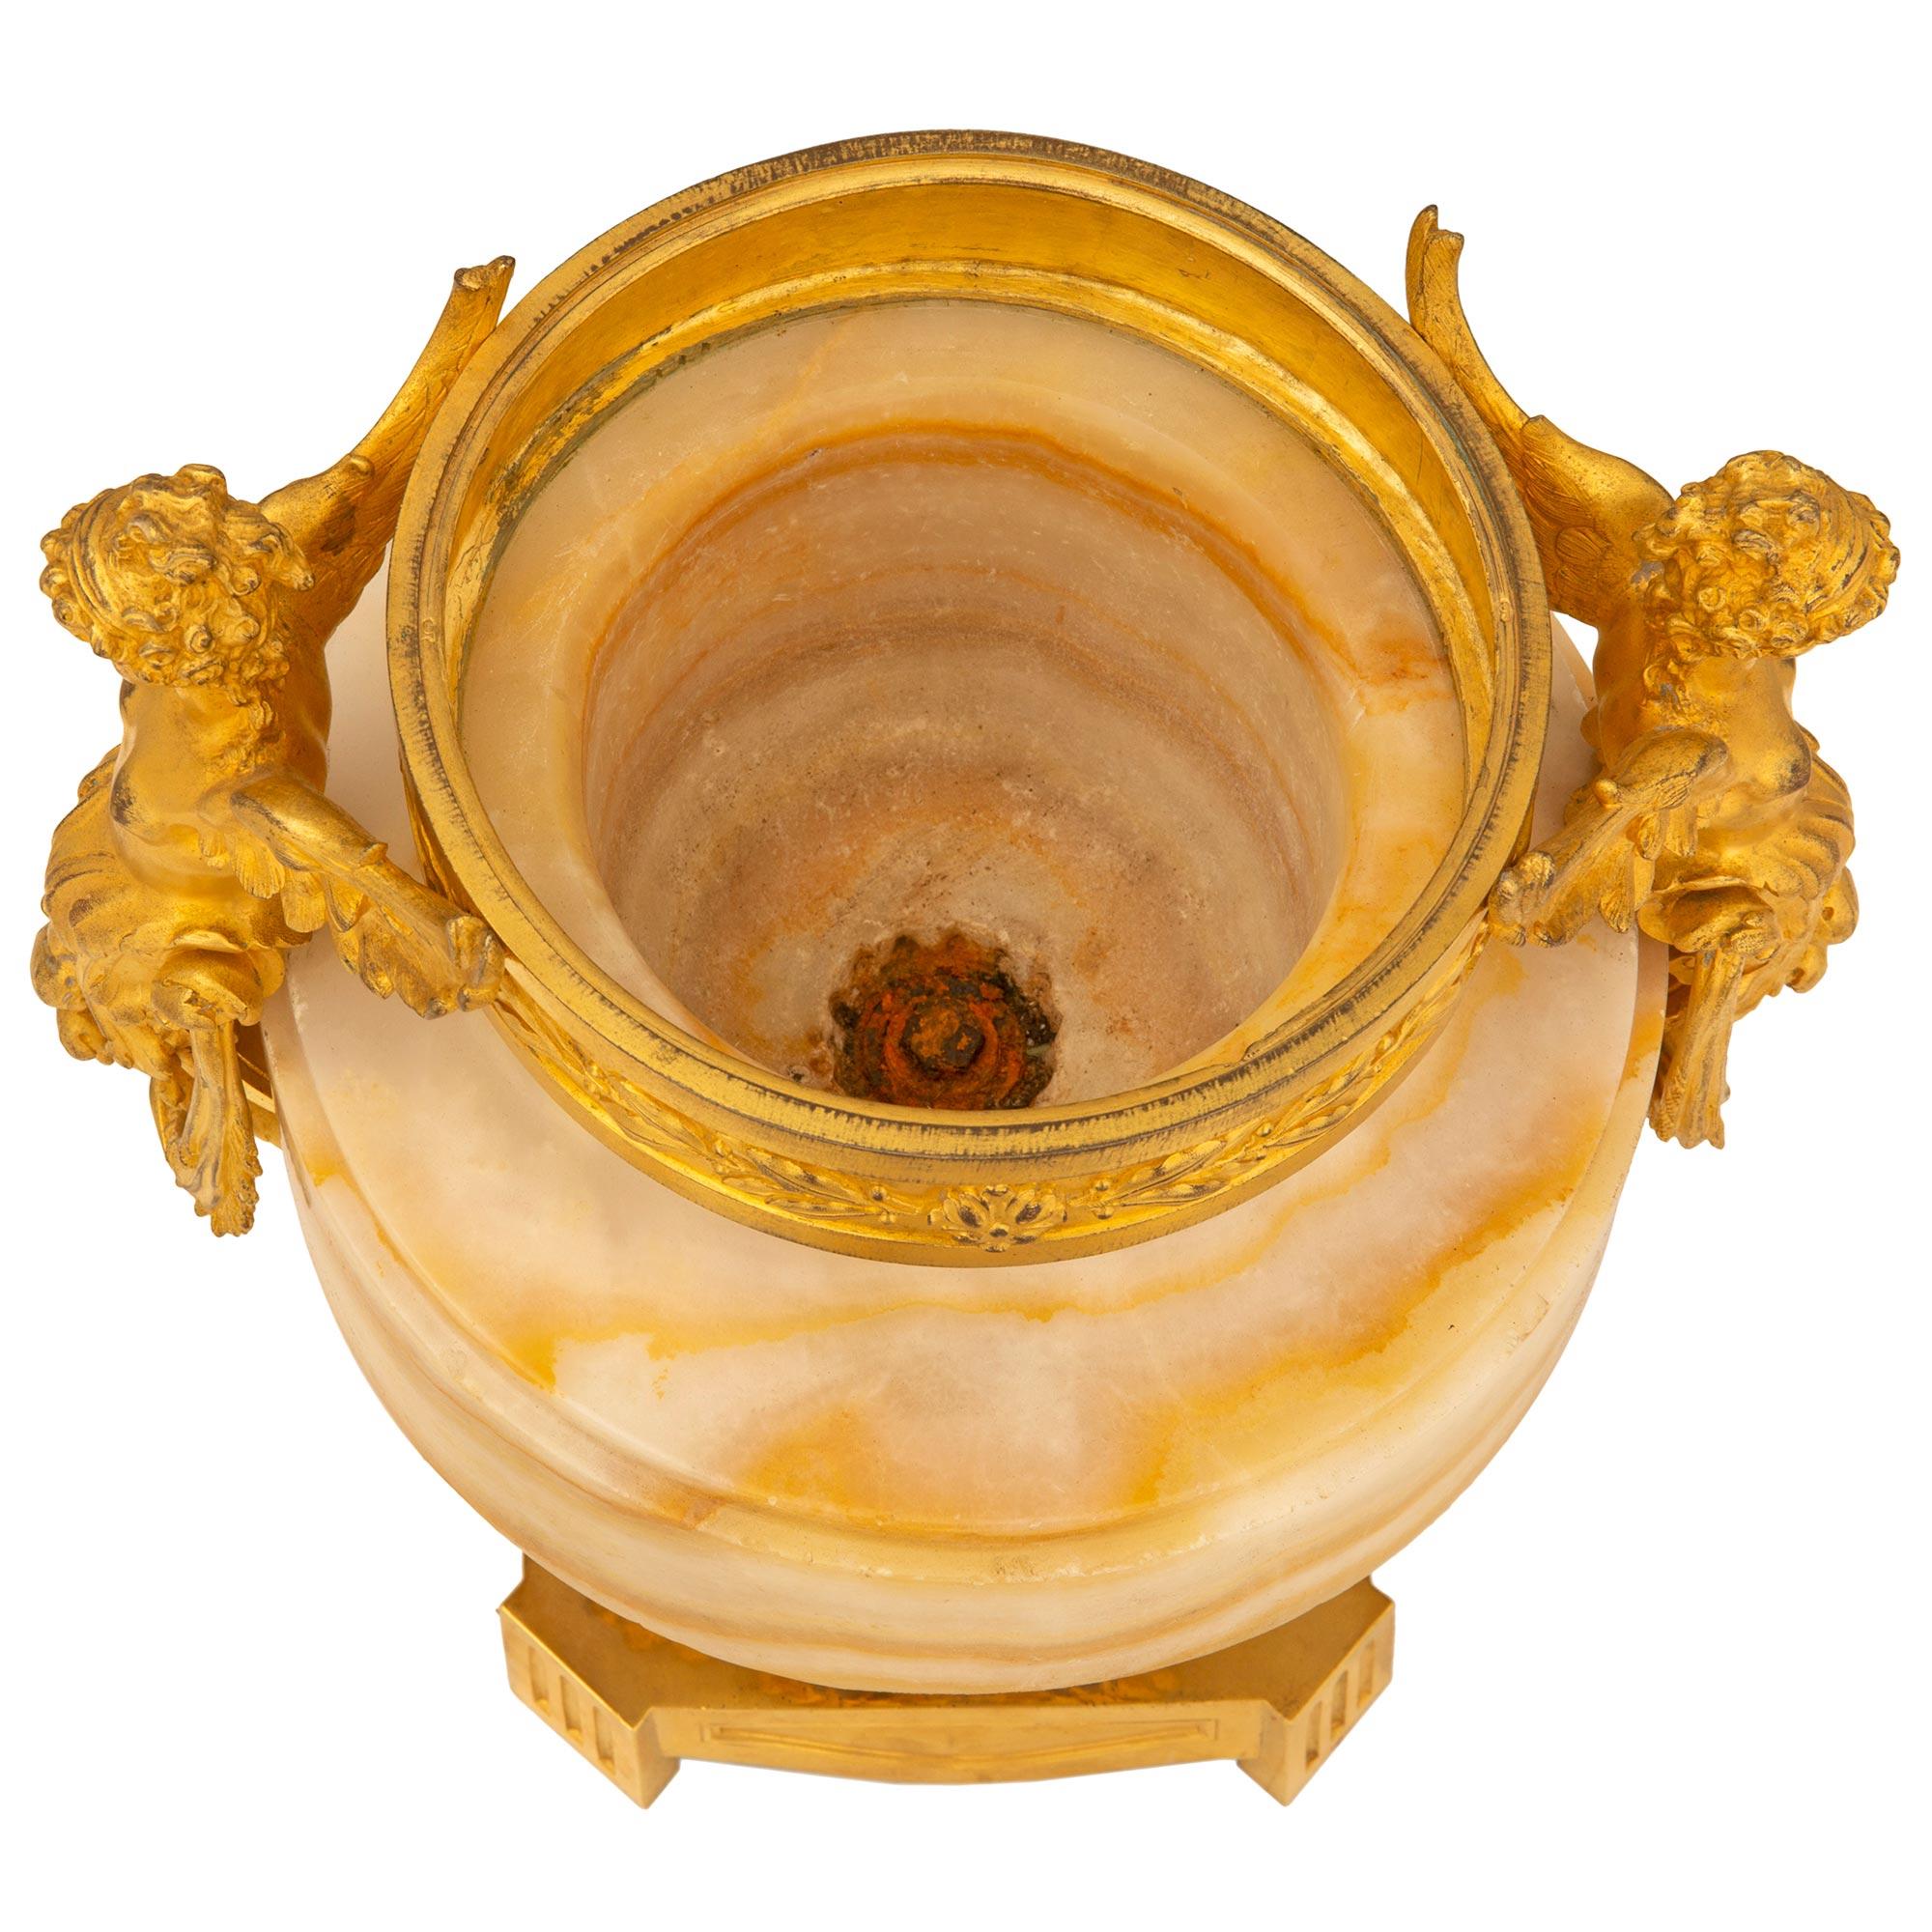 A stunning and extremely high quality French 19th century Louis XVI st. Belle Époque period Onyx and ormolu urn. The urn is raised by an elegant square ormolu base with cut fluted corners, fine arbalest shaped sides, a wrap around beaded band, and